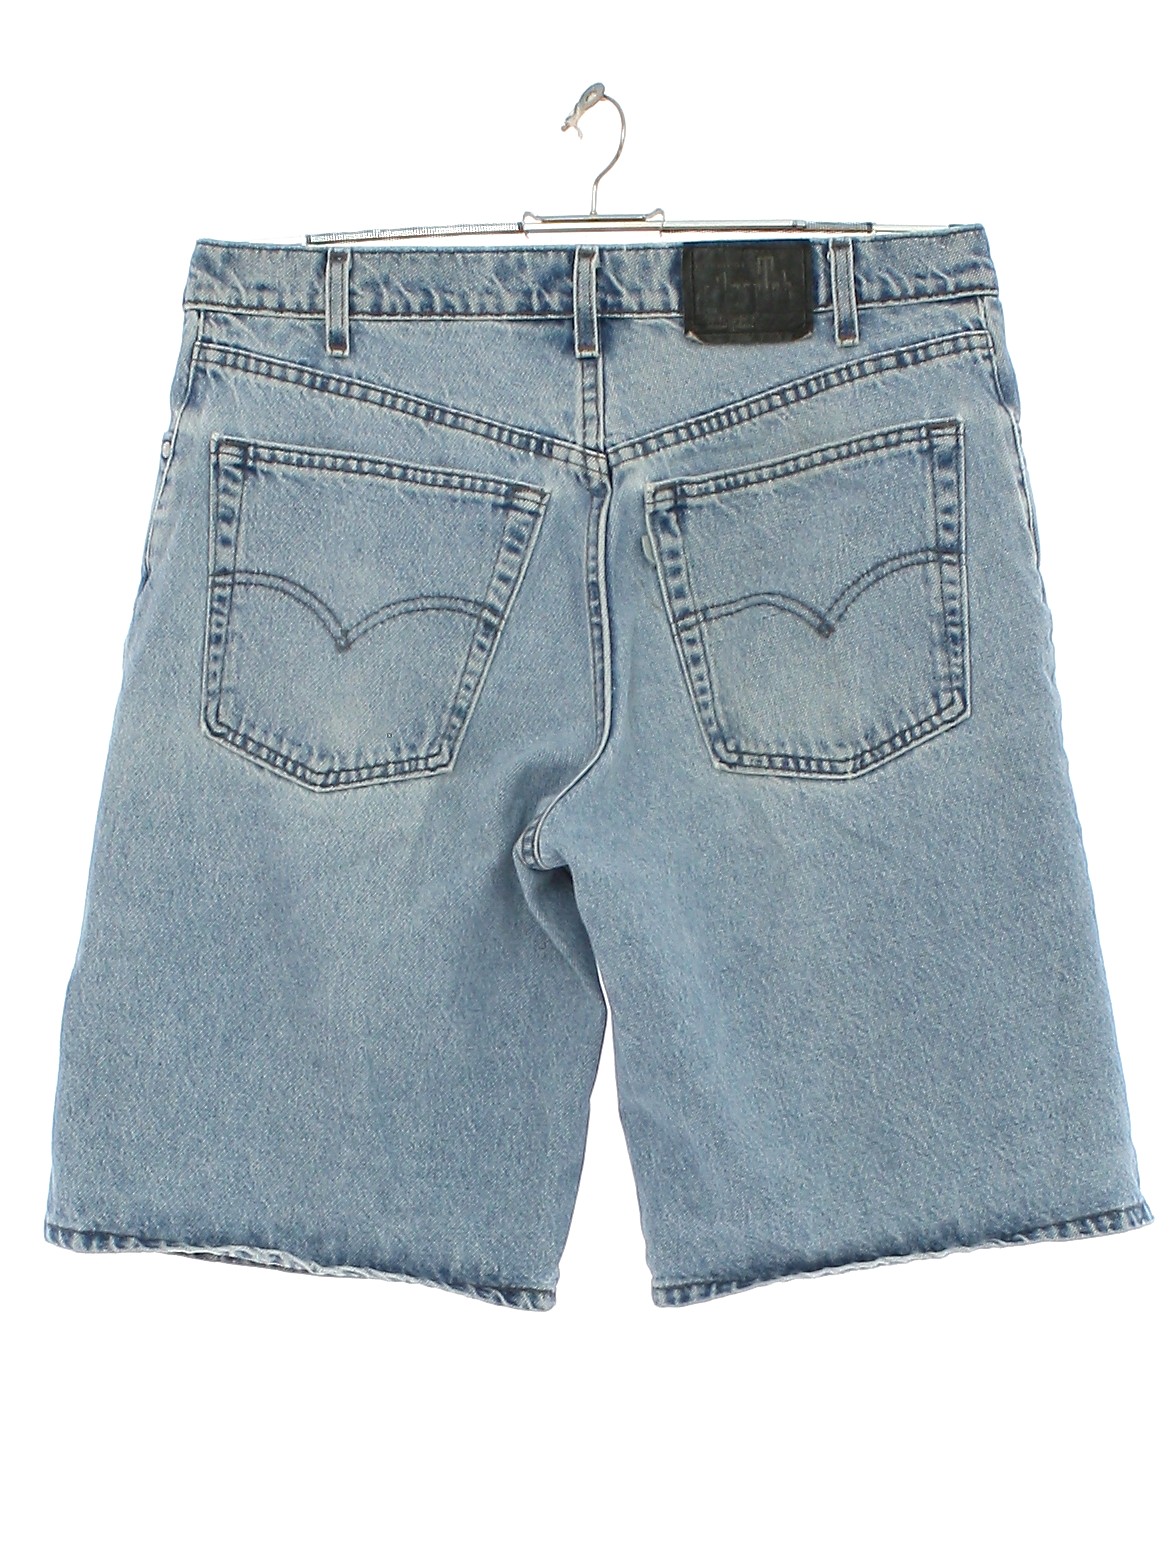 Retro 90s Shorts (Levis Silvertab) : Late 90s (Dated 1997) -Levis ...